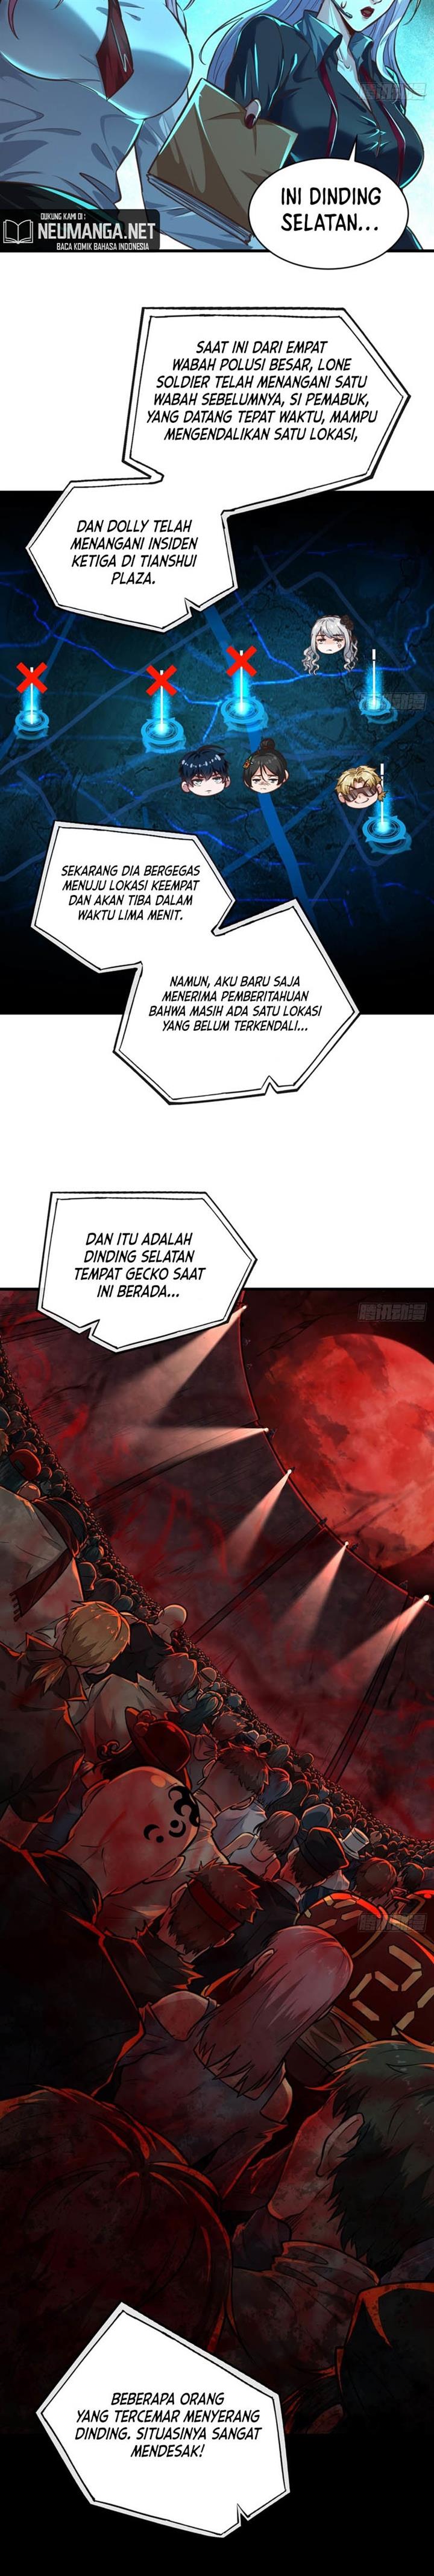 Since The Red Moon Appeared Chapter 43